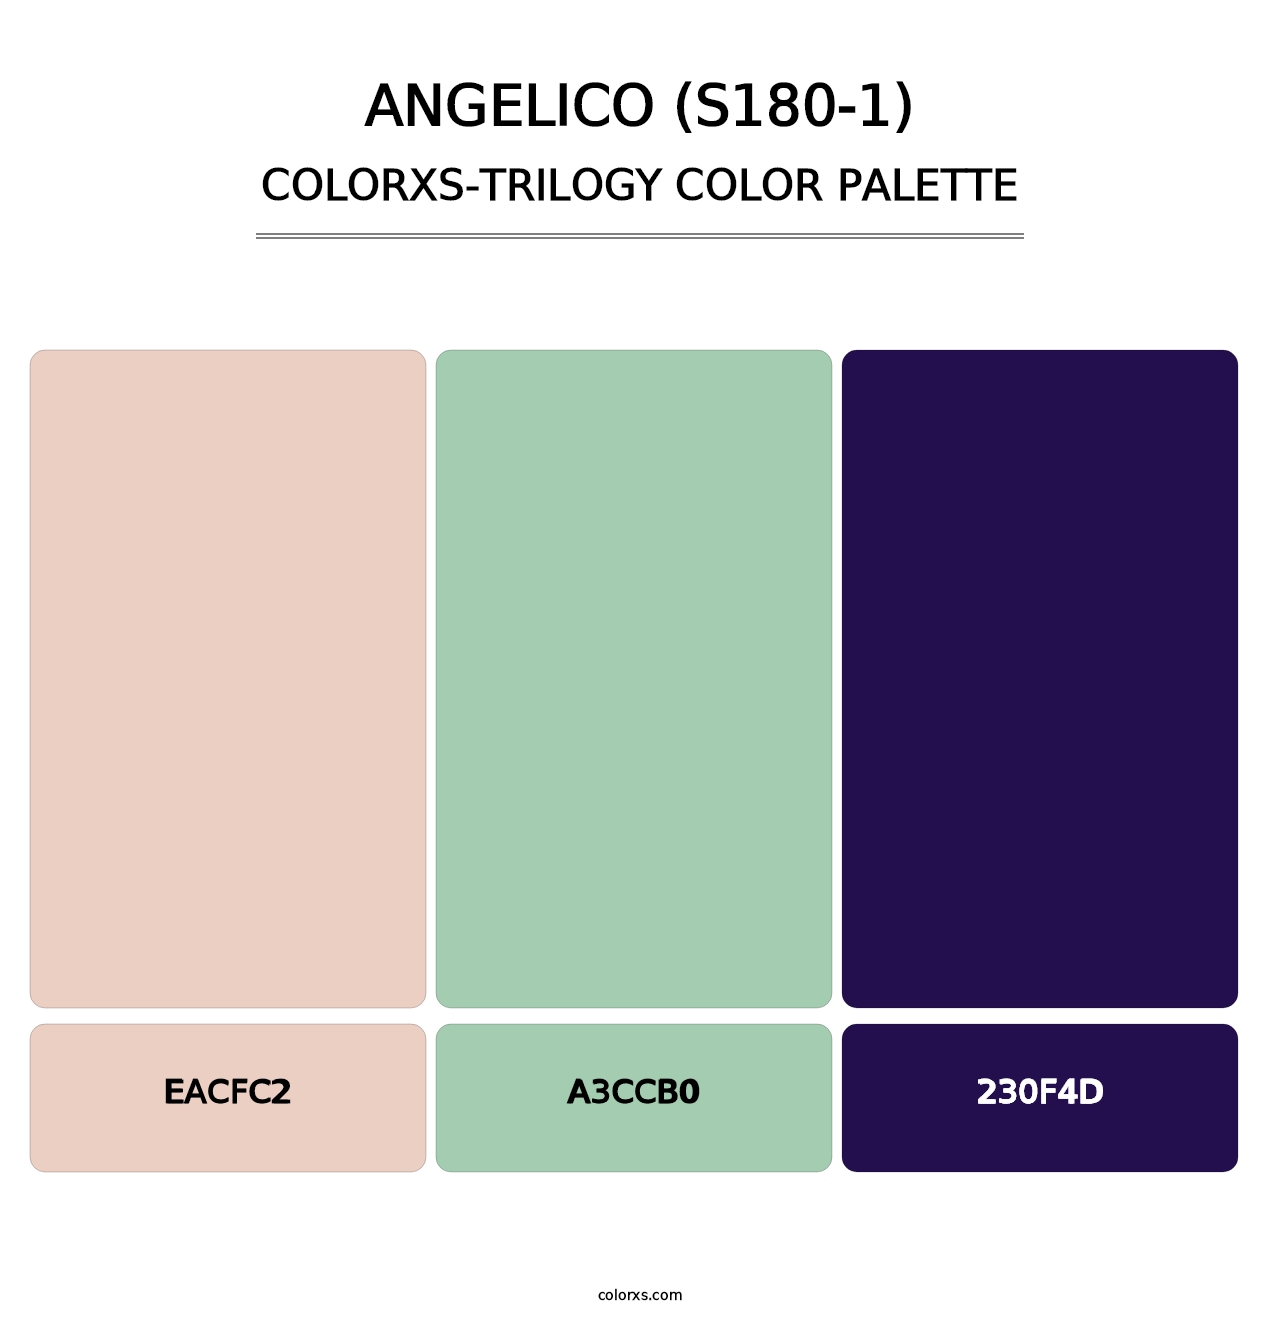 Angelico (S180-1) - Colorxs Trilogy Palette